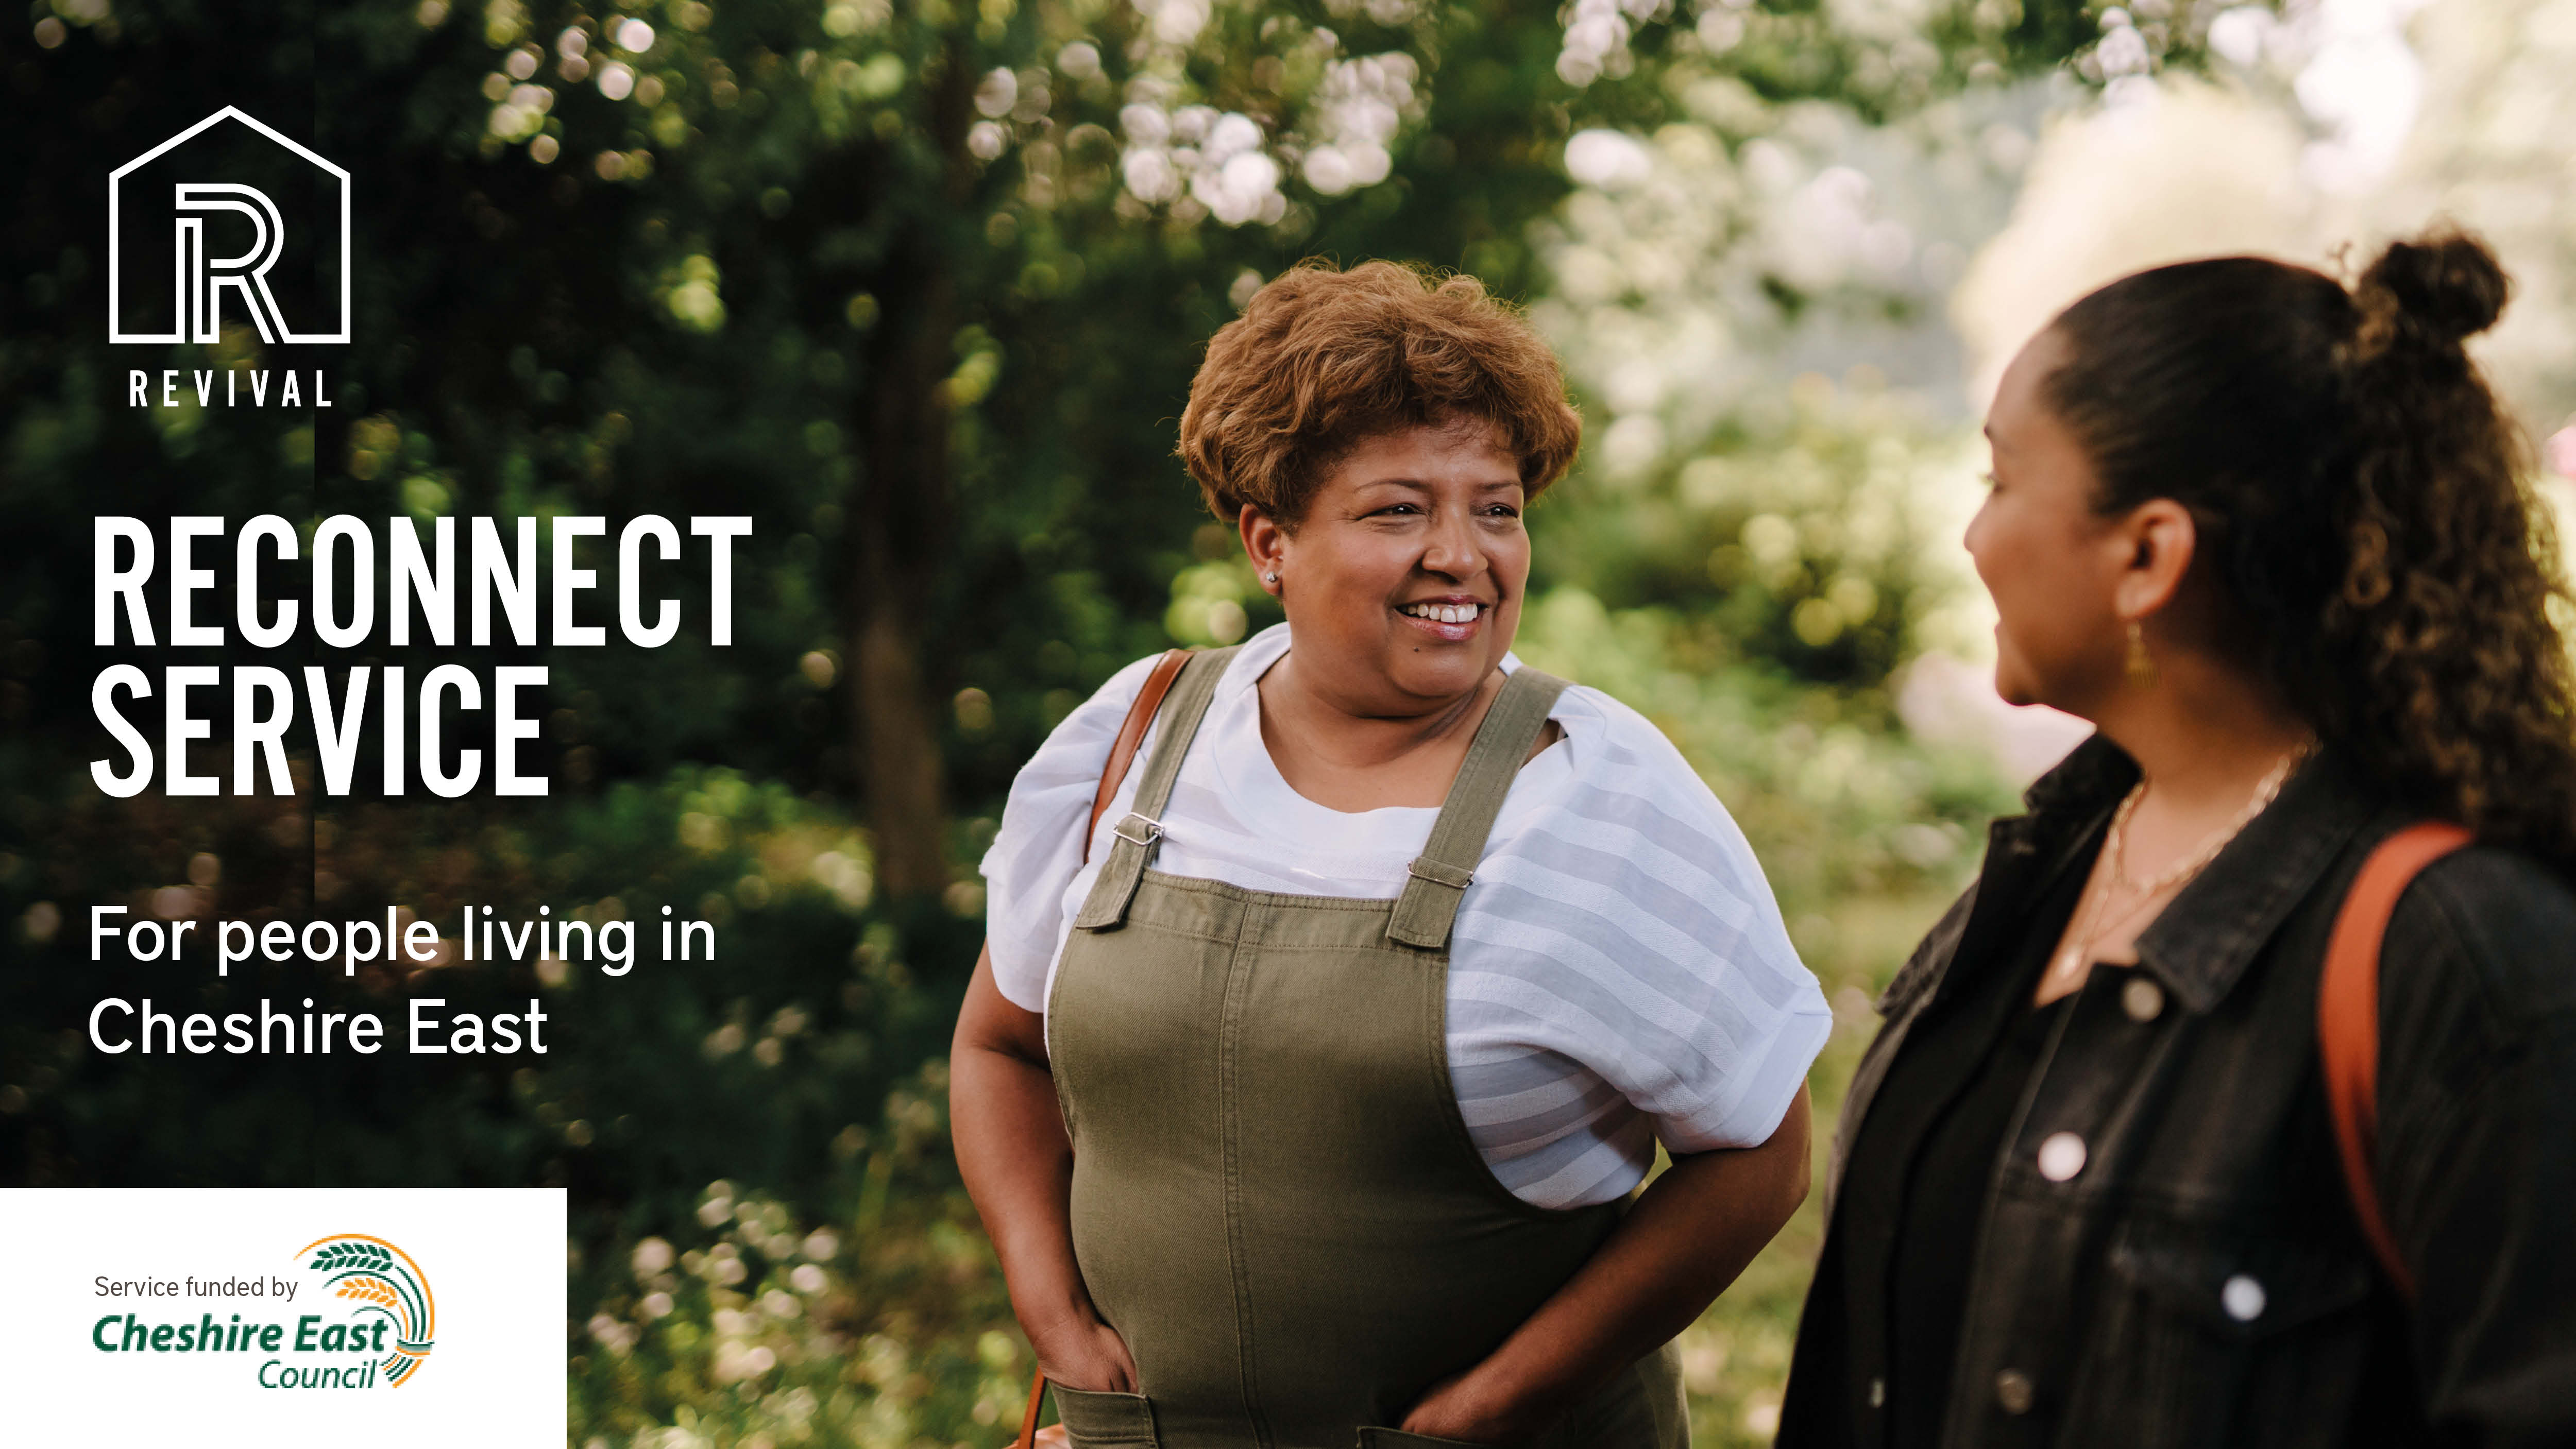 two women smiling and looking at each other. With text over the image saying Revival Reconnect Service for people living in Cheshire East